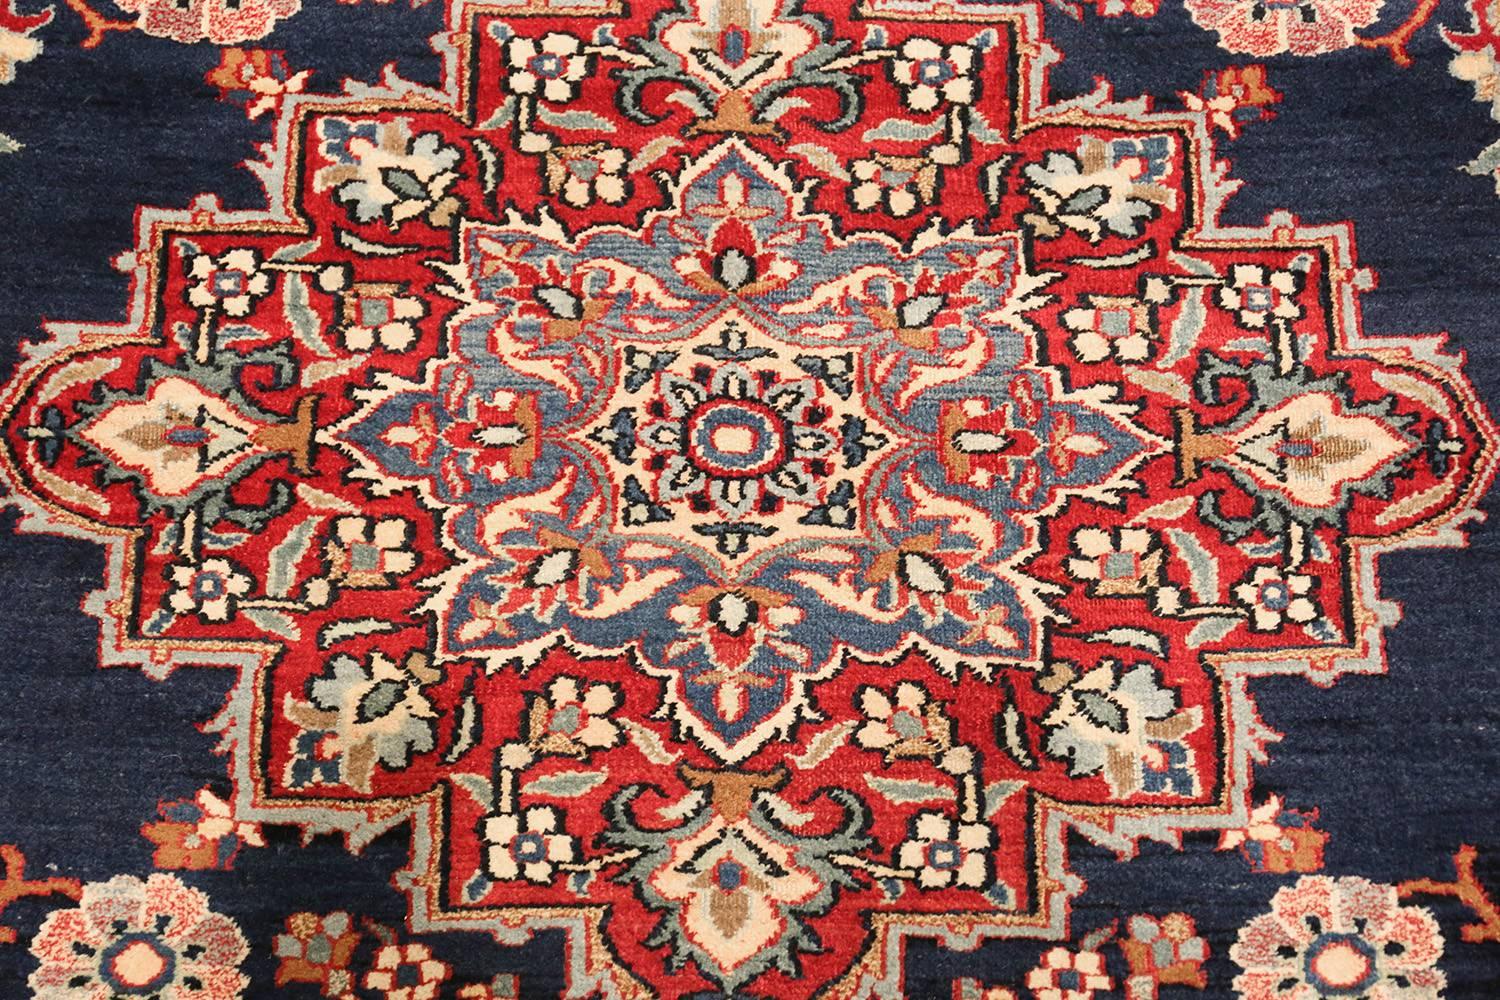 Beautiful Antique Persian Khorassan Rug. Size: 4 ft 5 in x 6 ft 8 in 1